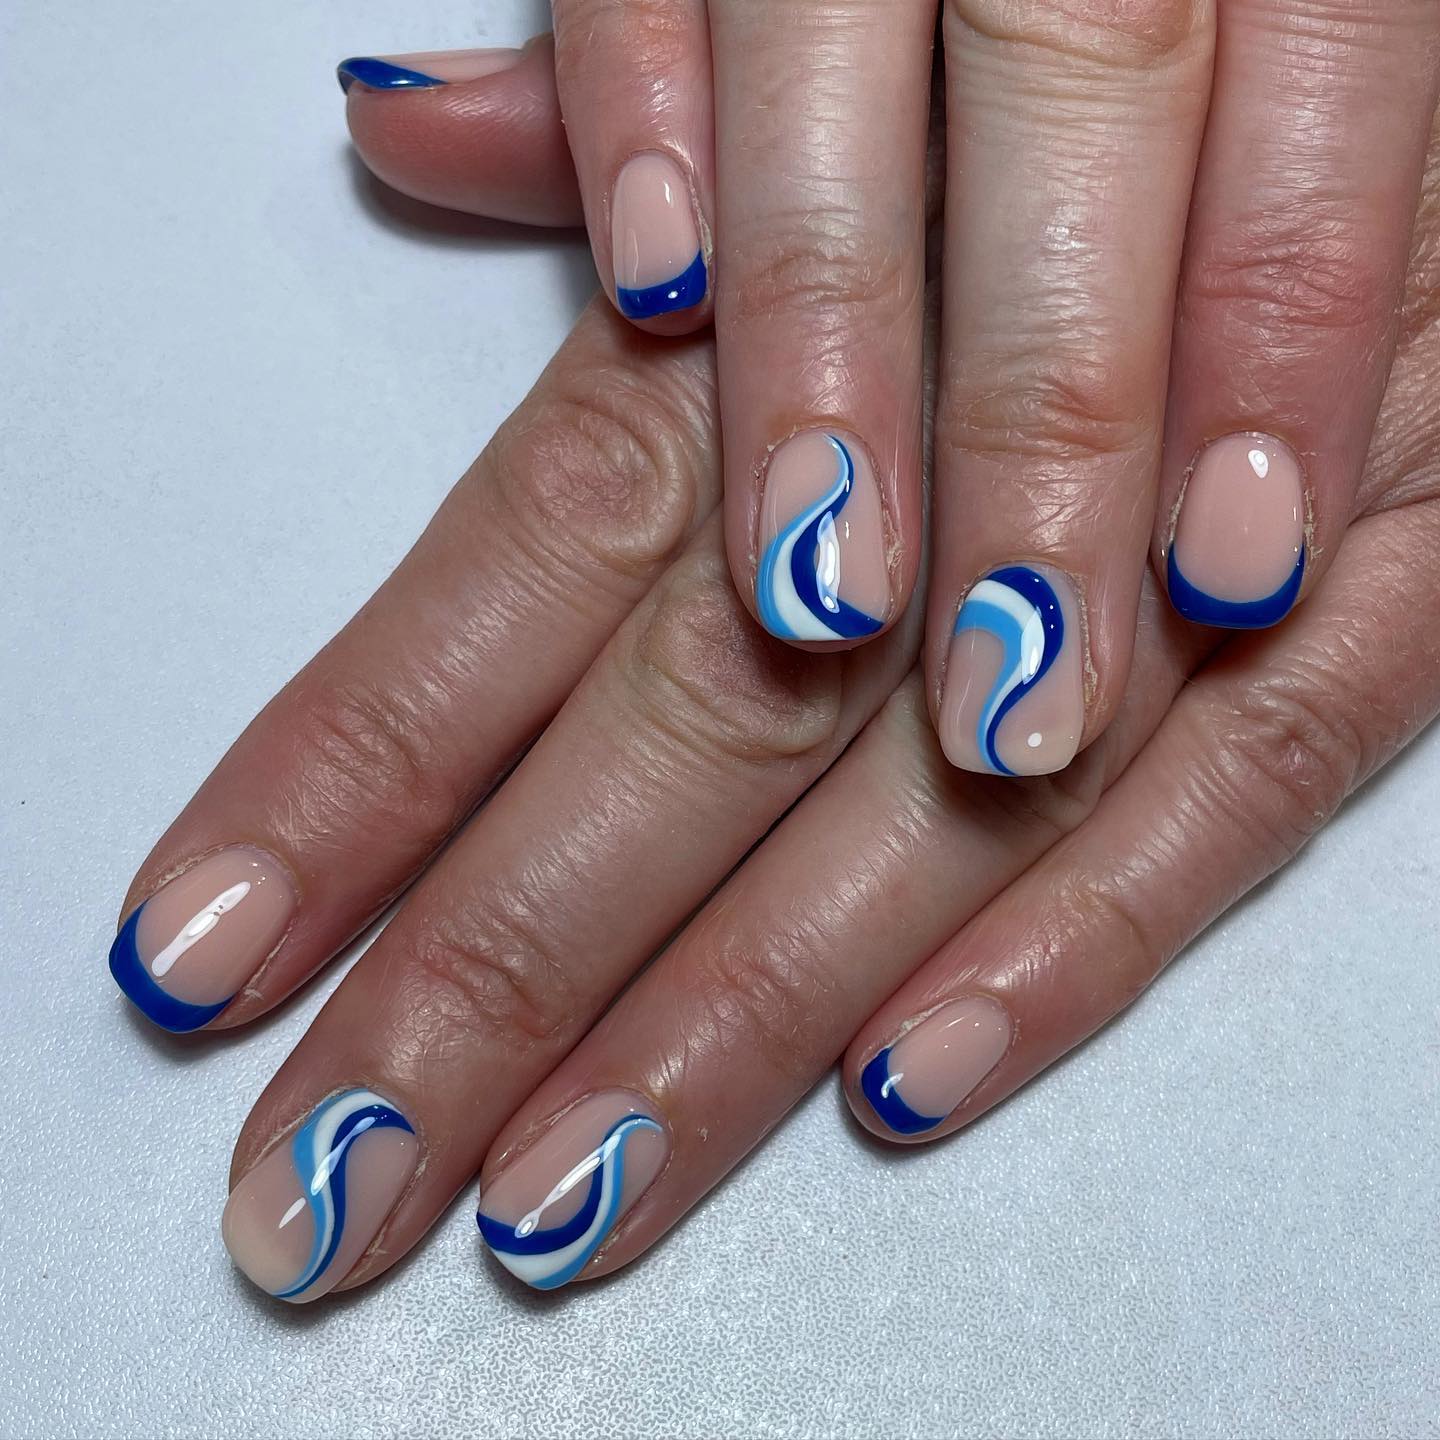 Combined with dark blue French tips, blue and white swirls remind someone the beautiful waves of an ocean. Go for it if you like blue color and swirls.